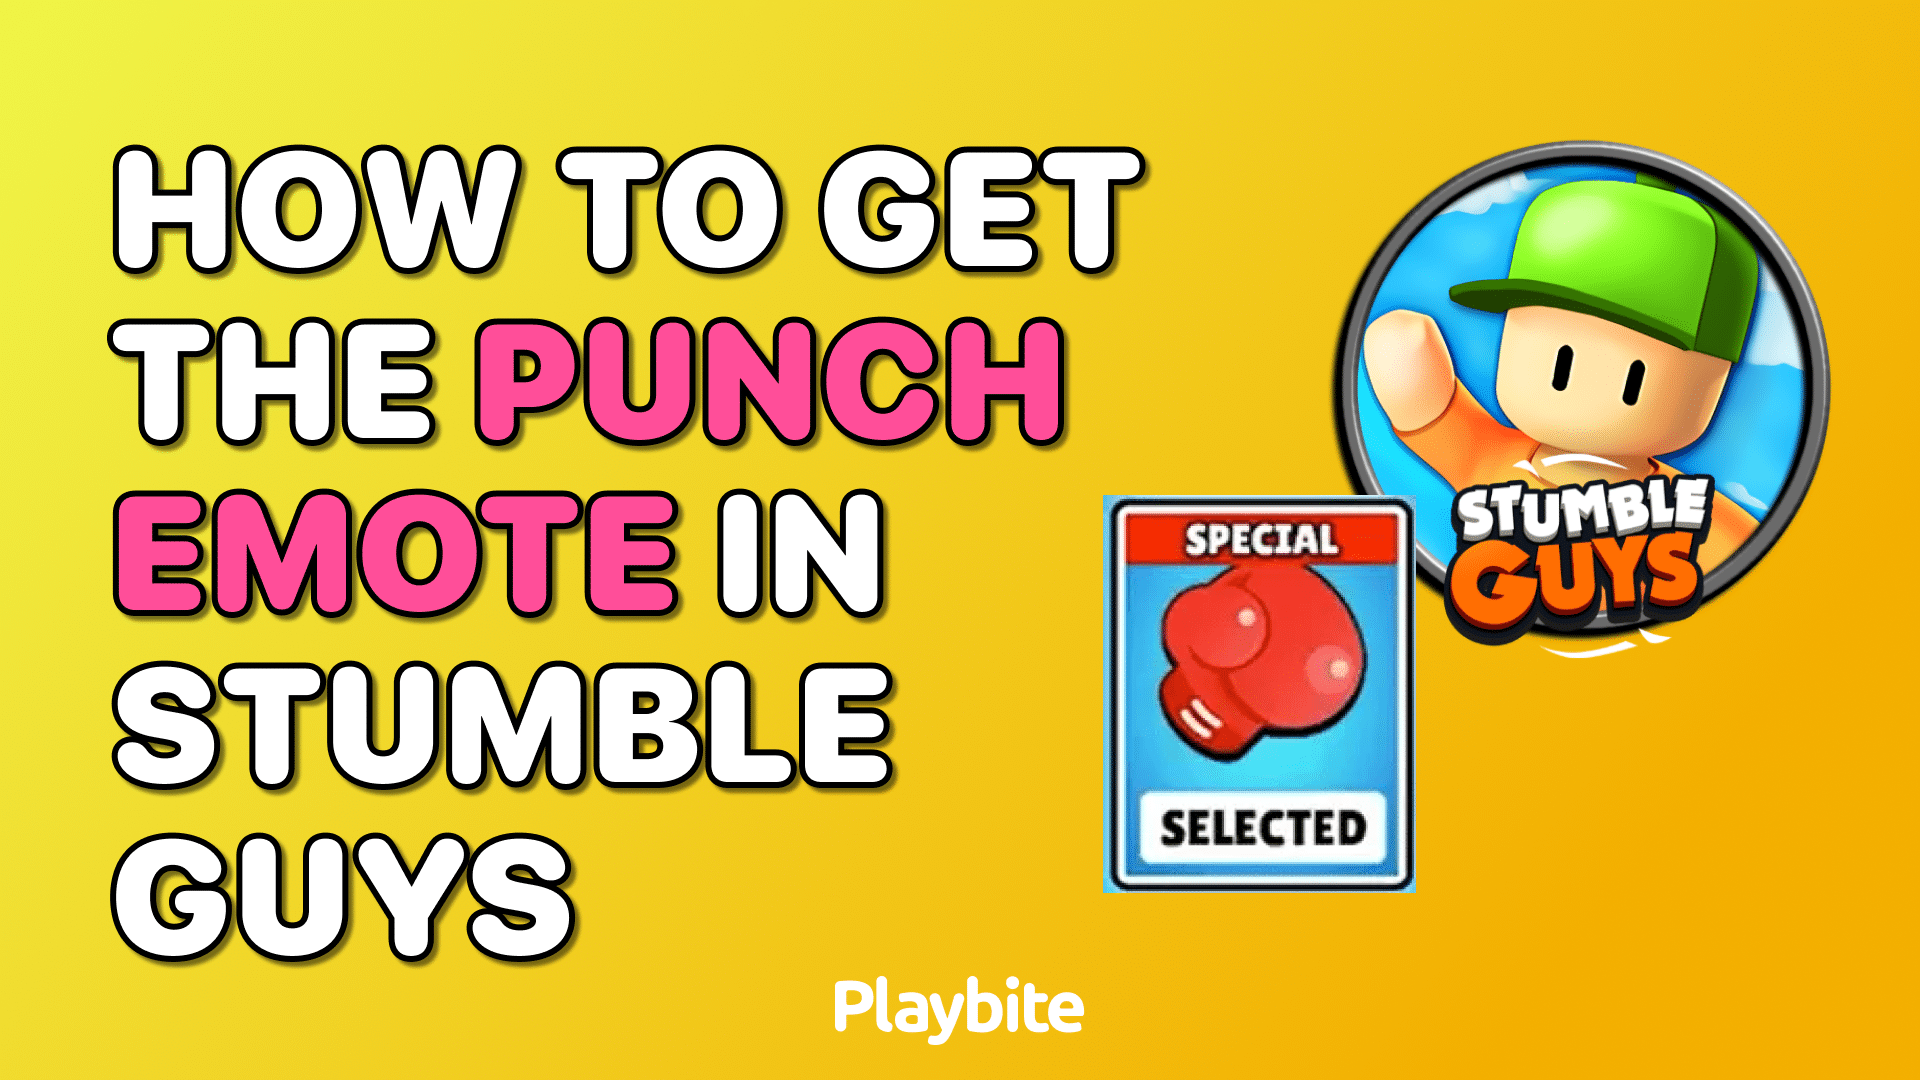 Stumble Guys - When you are the only one without punch